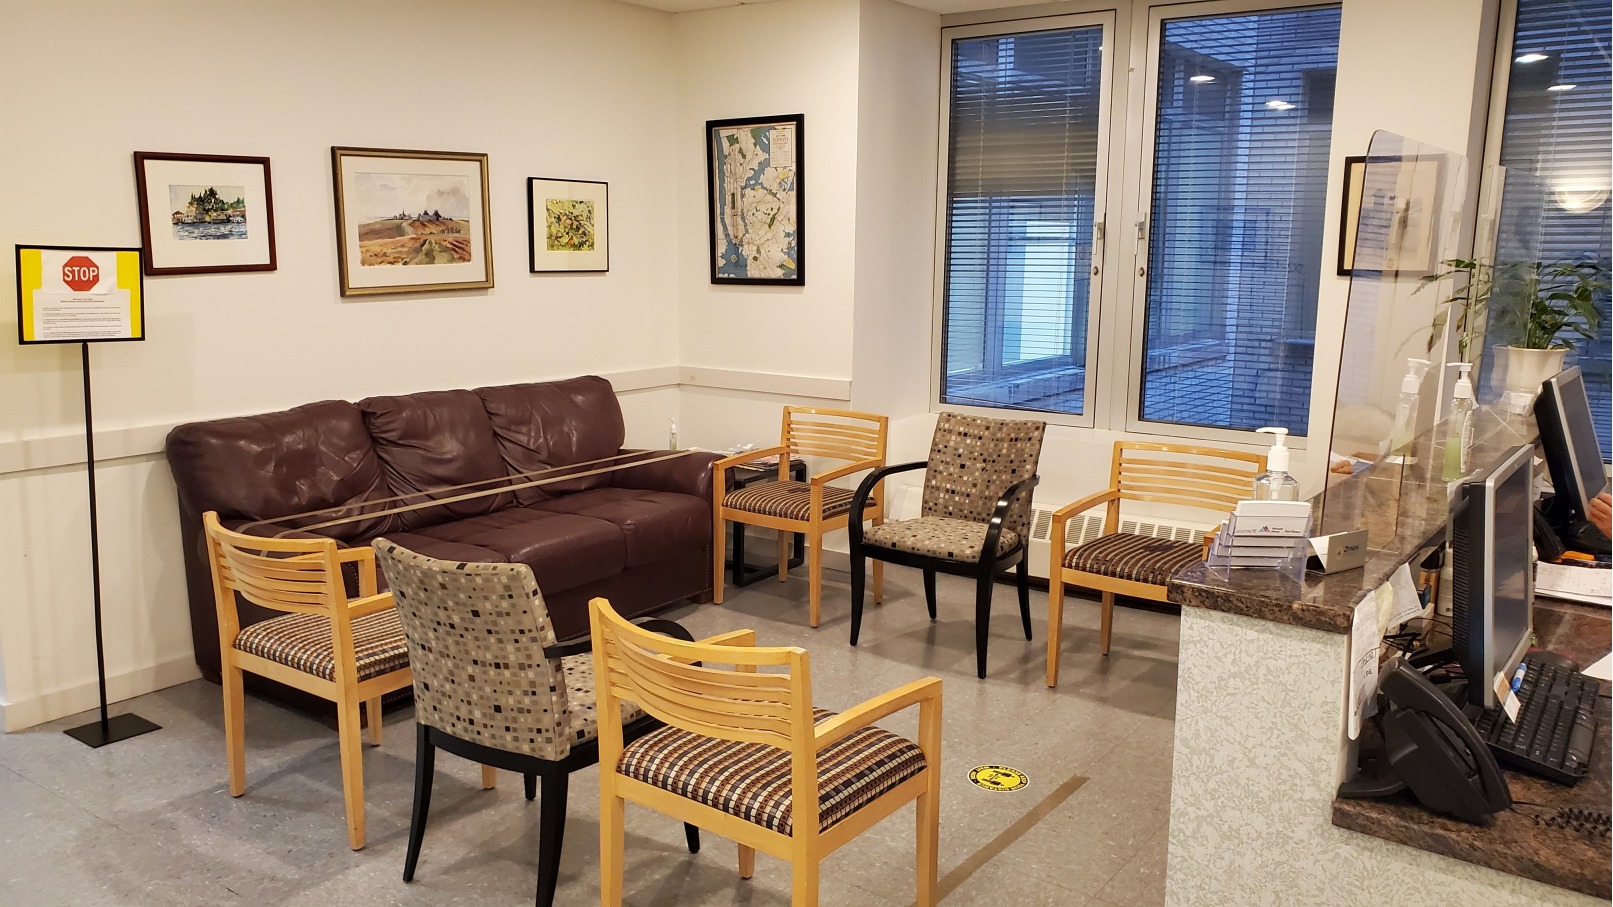 Advantages of Services in New York Cardiac Diagnostic Center (Midtown)